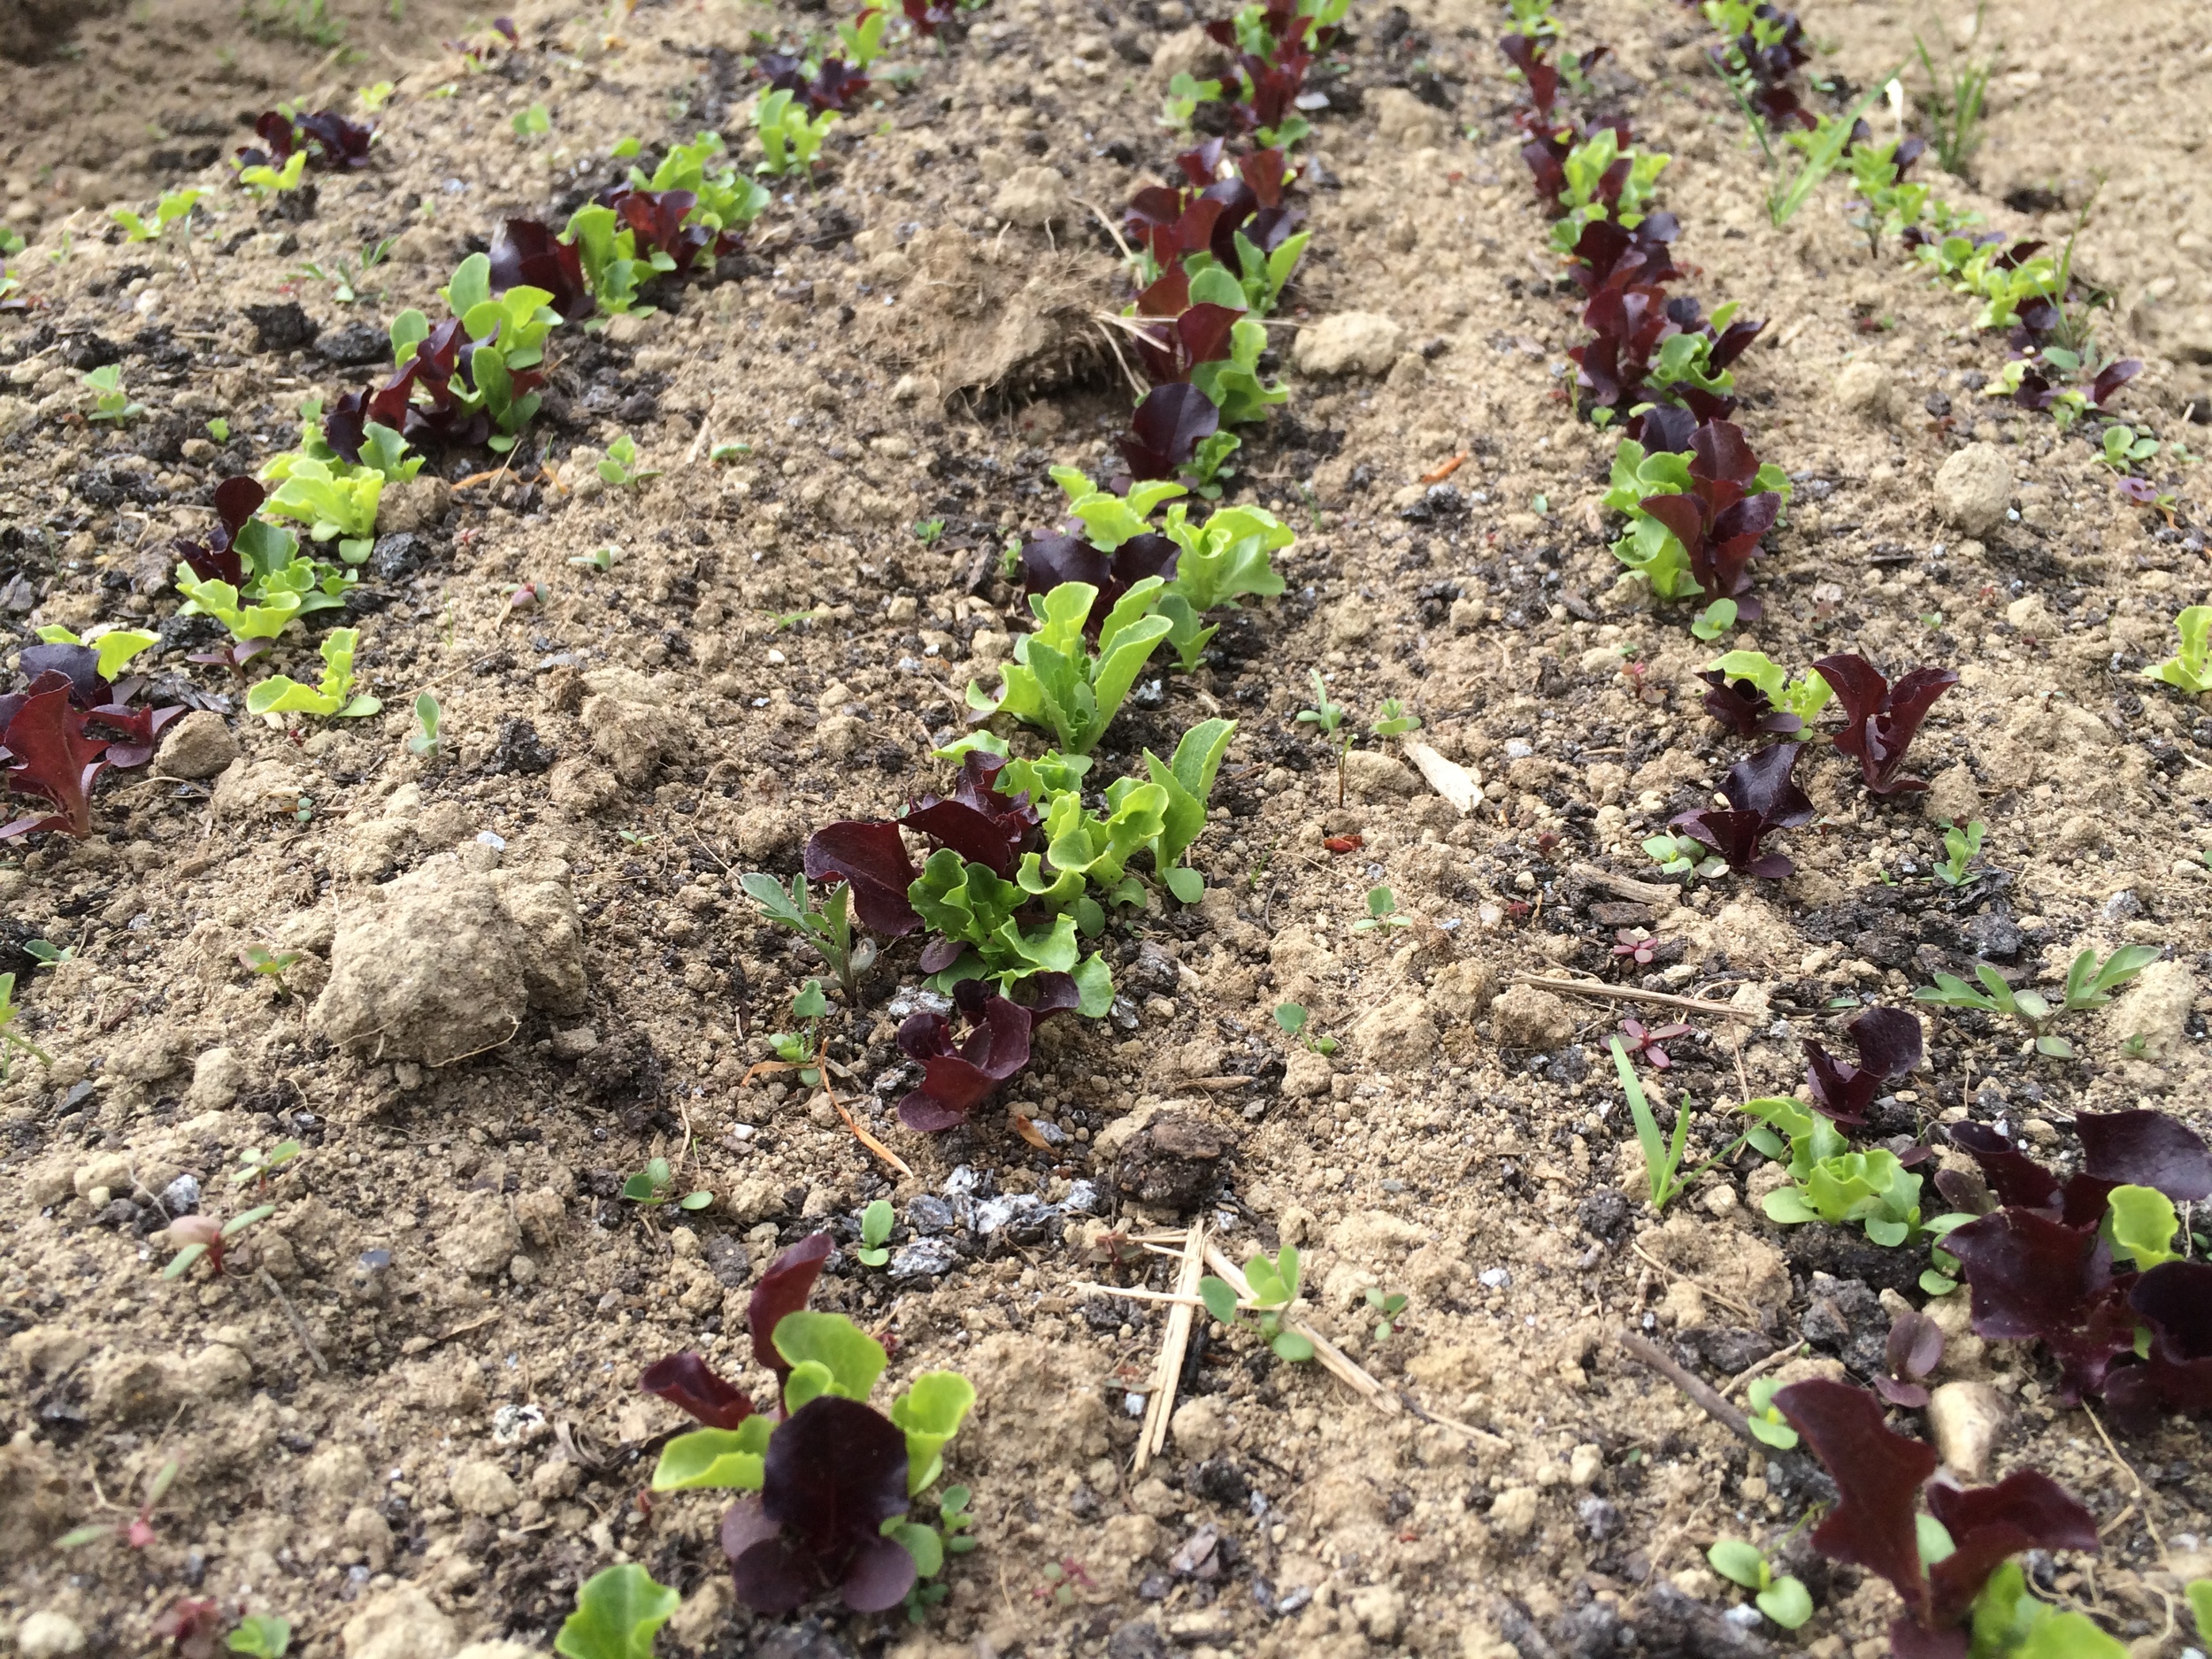 Leaf lettuce for an early salad mix.